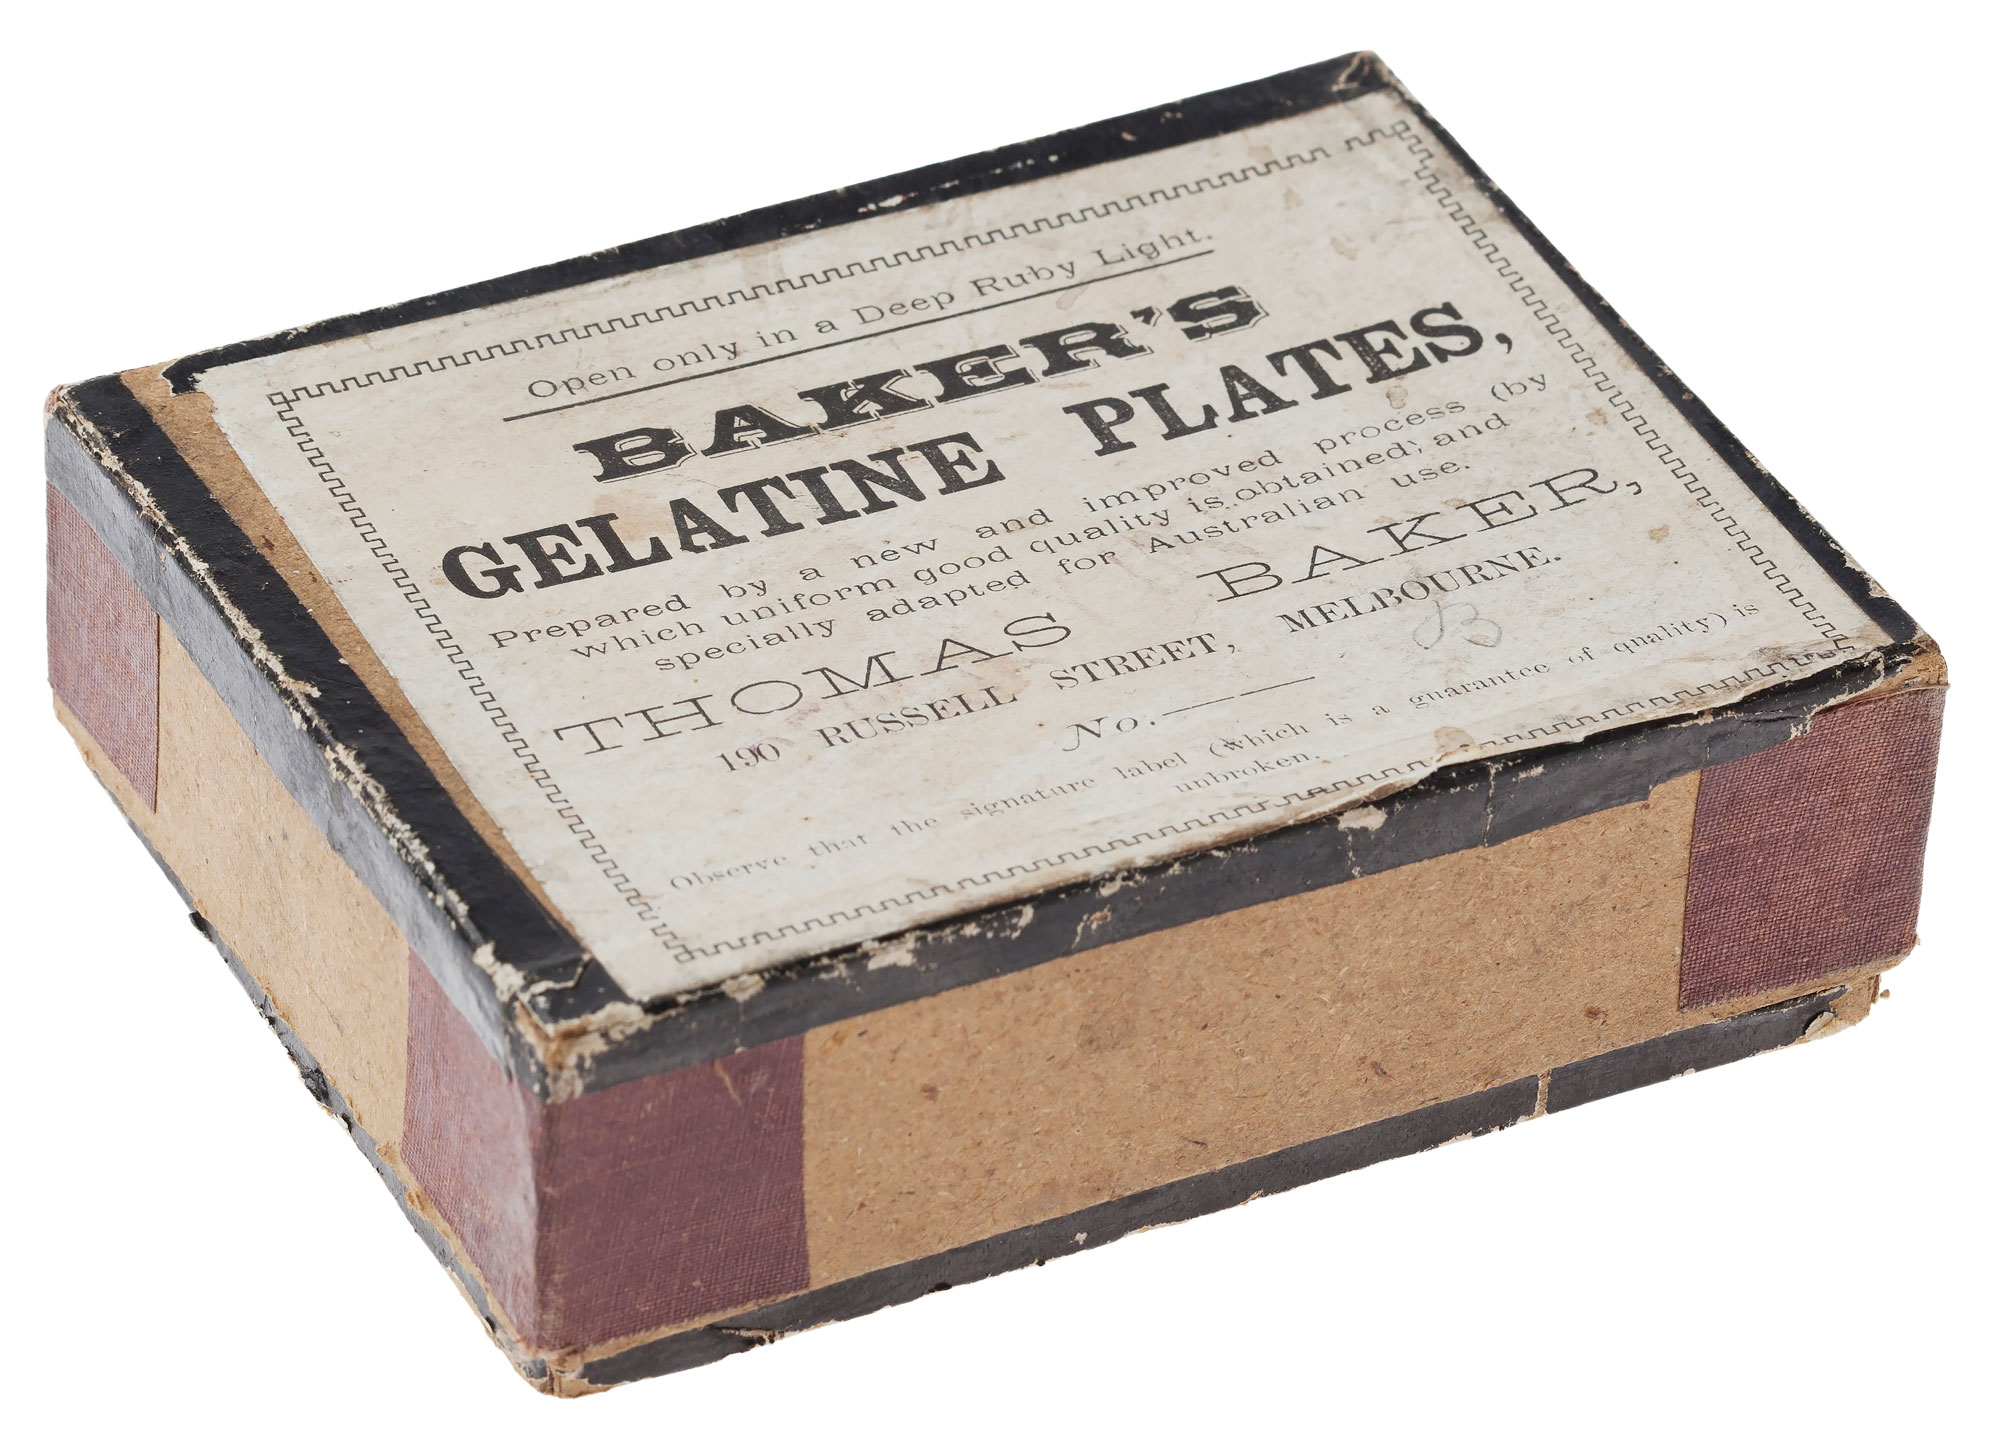 A small box reading 'Baker's Gelatine Plates' on the lid